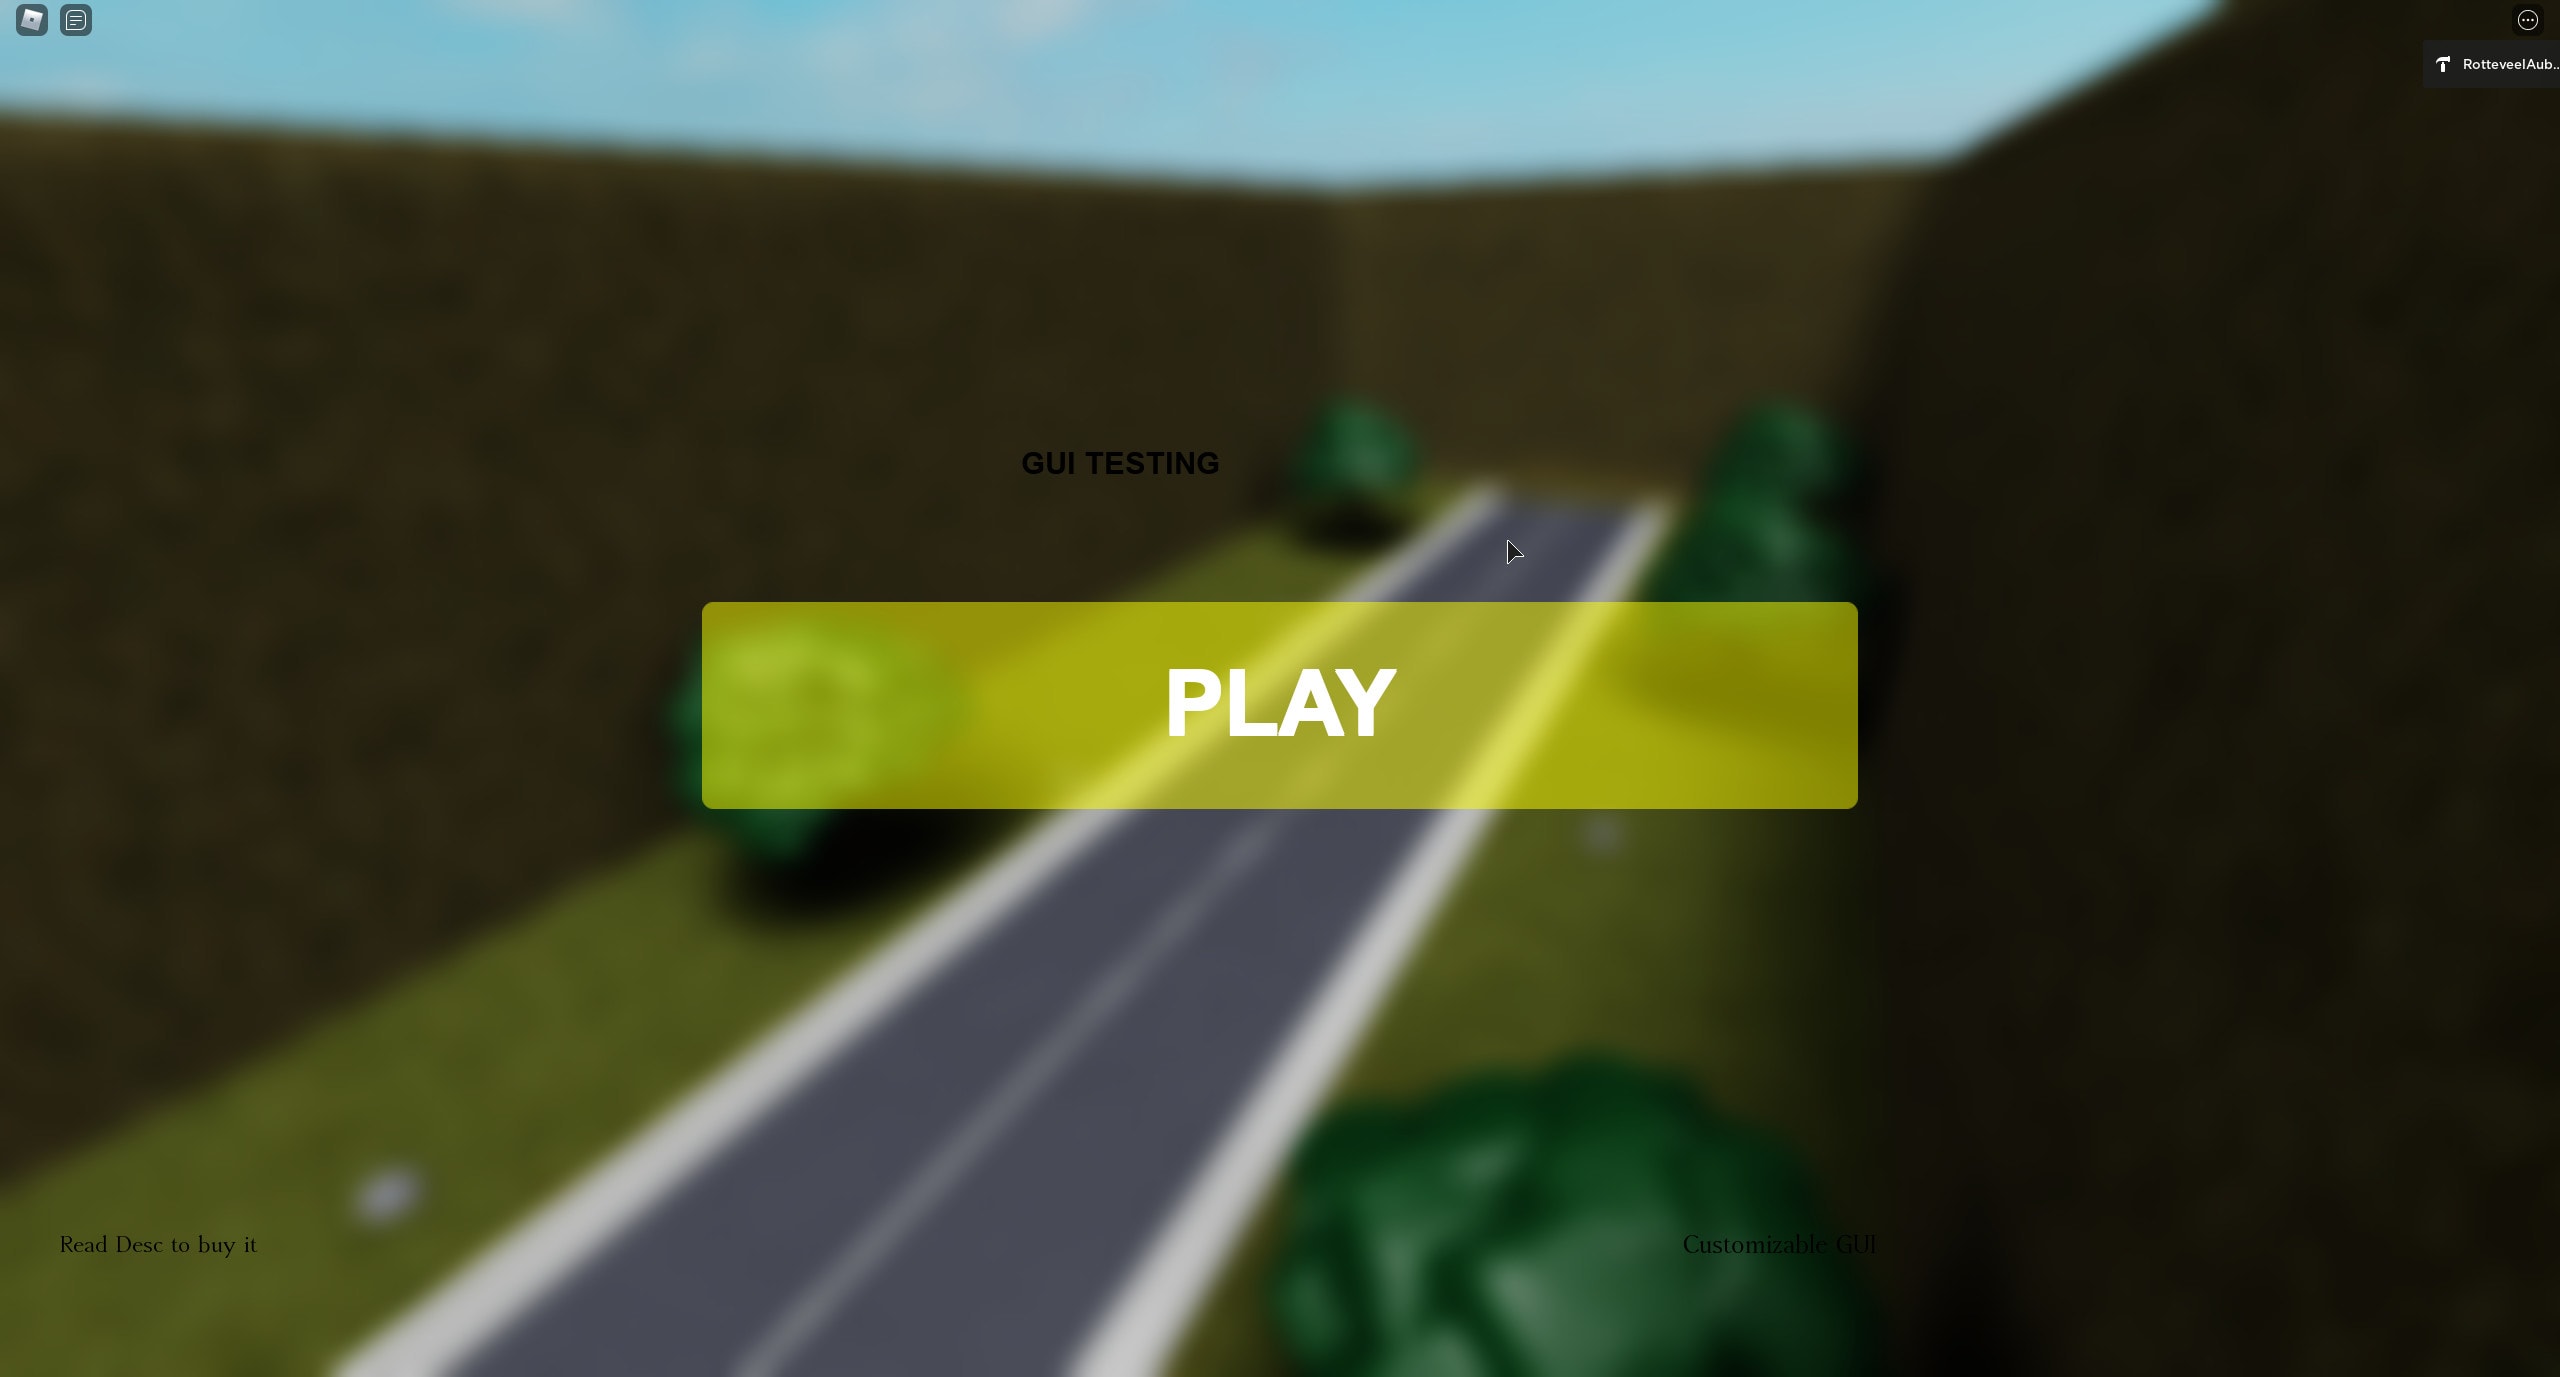 Make You Any Gui On Roblox Studio By Prorobloxdev Fiverr - textbox.text roblox studio